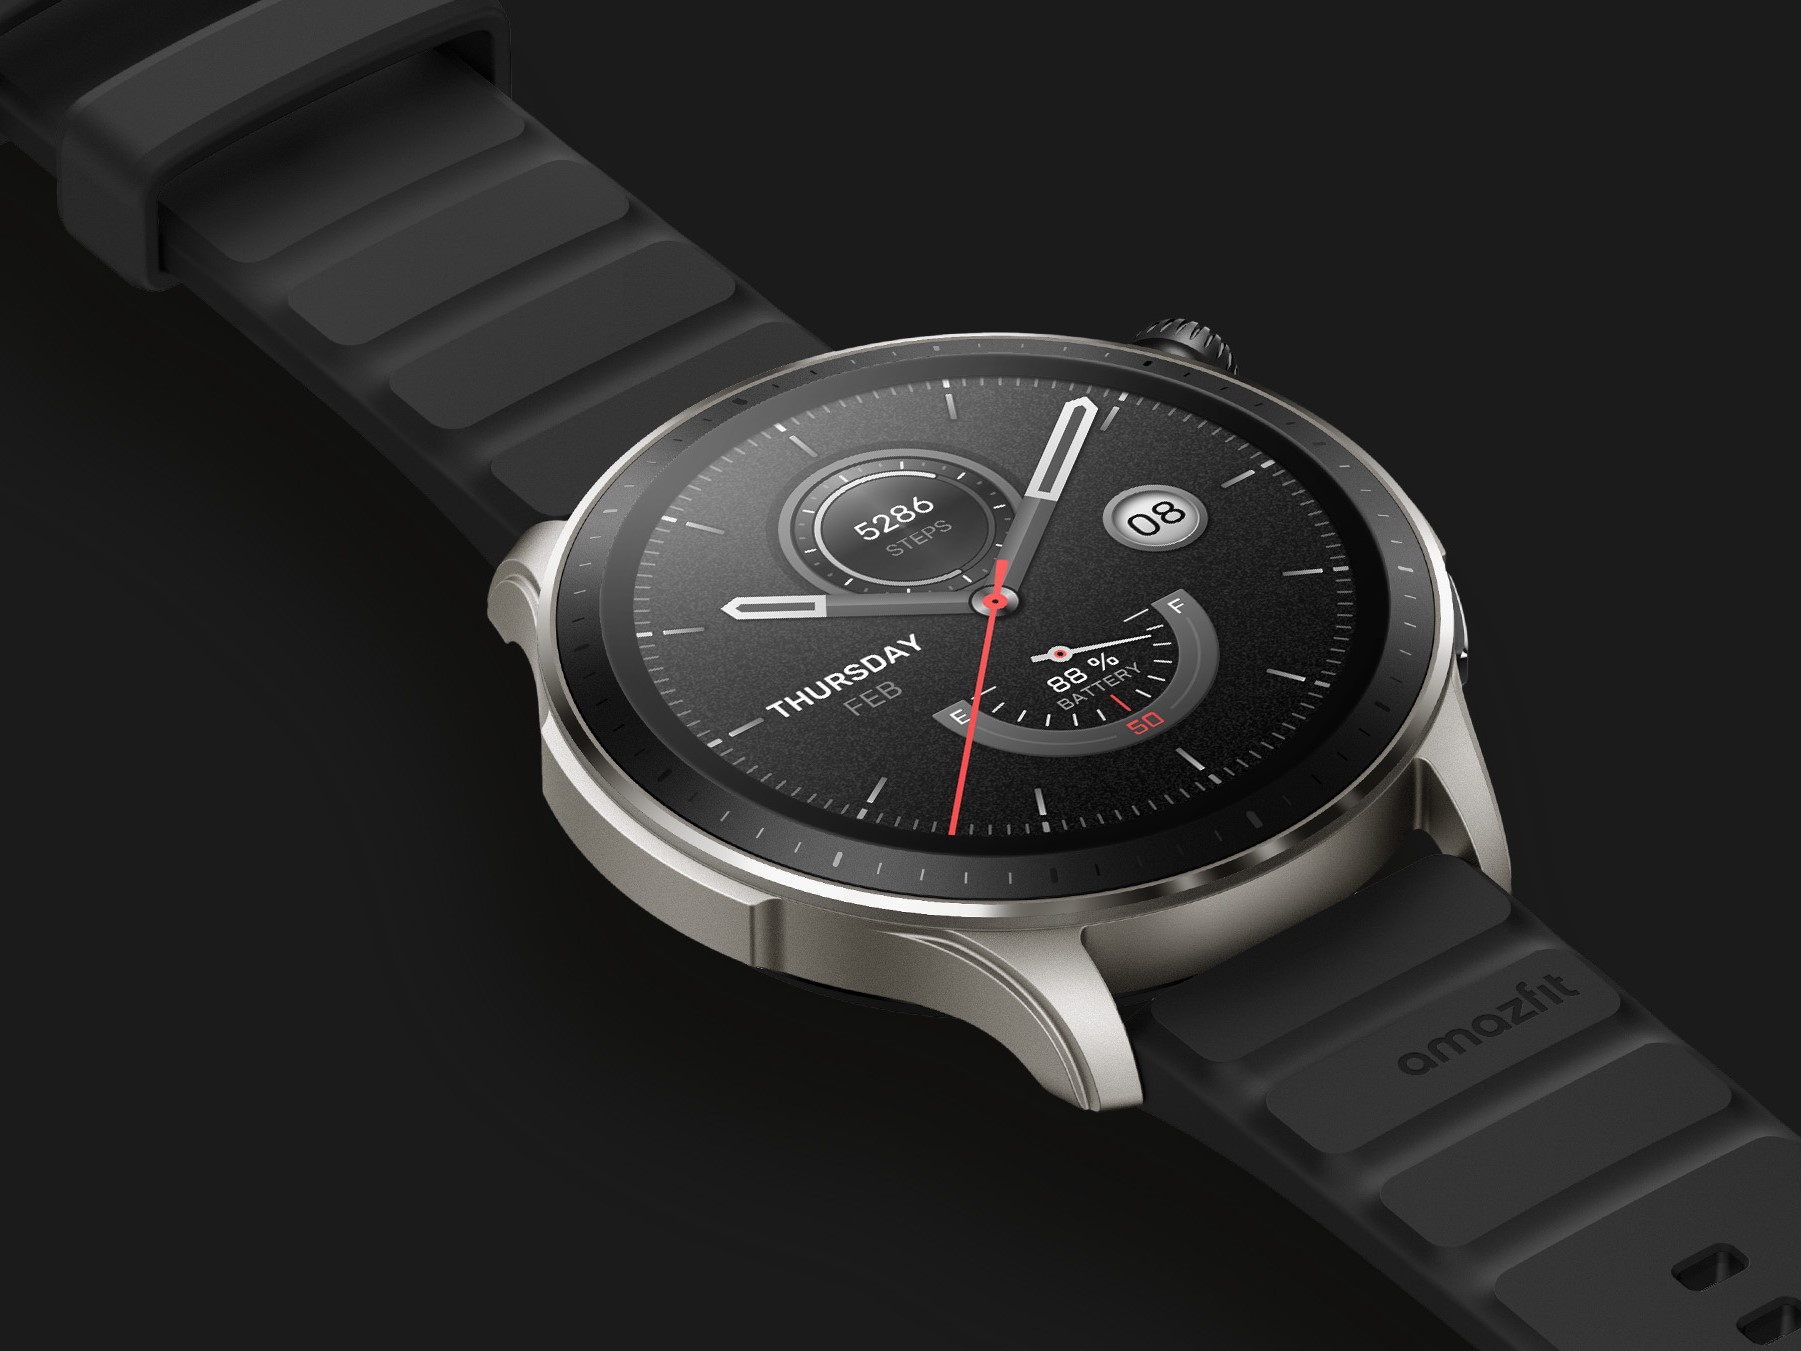 Amazfit rolls out ZeppOS 3.0 to GTR 4 smartwatch in new update -   News